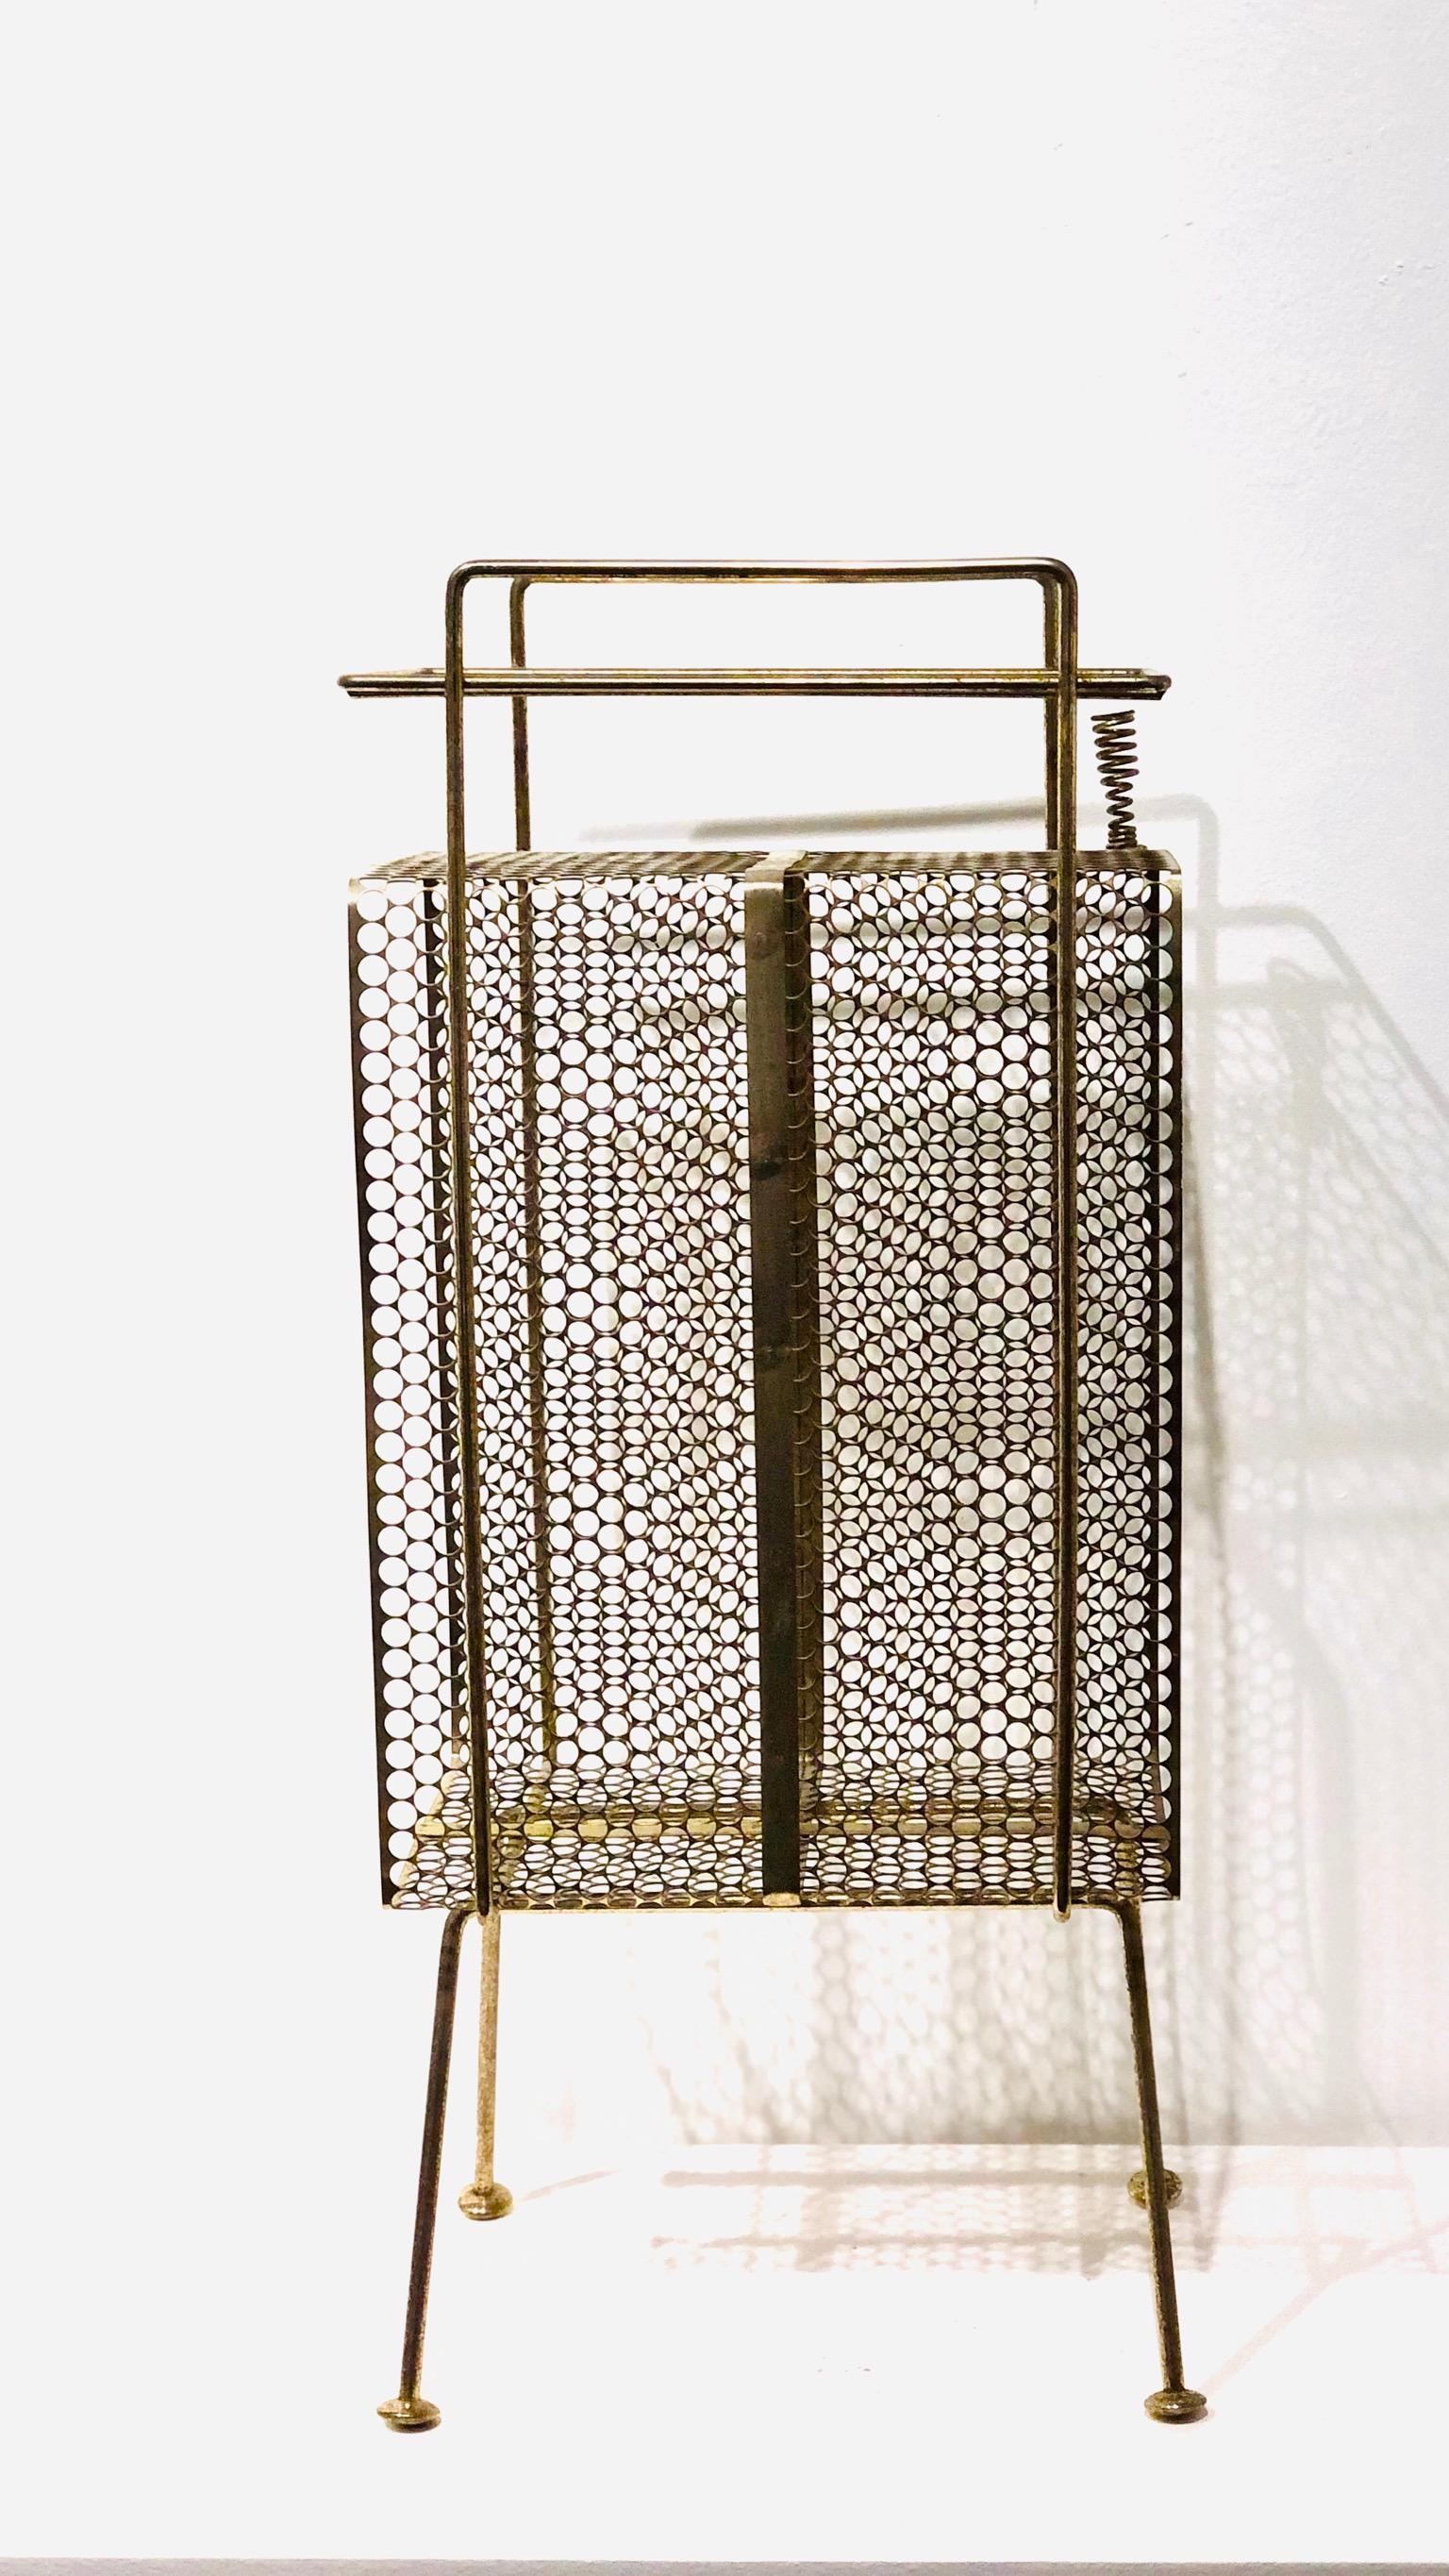 The 1950s Classic midcentury, atomic age era Stand/rack original used for the telephone, pen holder and phone directory, this one its in brass finish with some wear and patina due to age. Designed by Richard Galef for Ravenware.